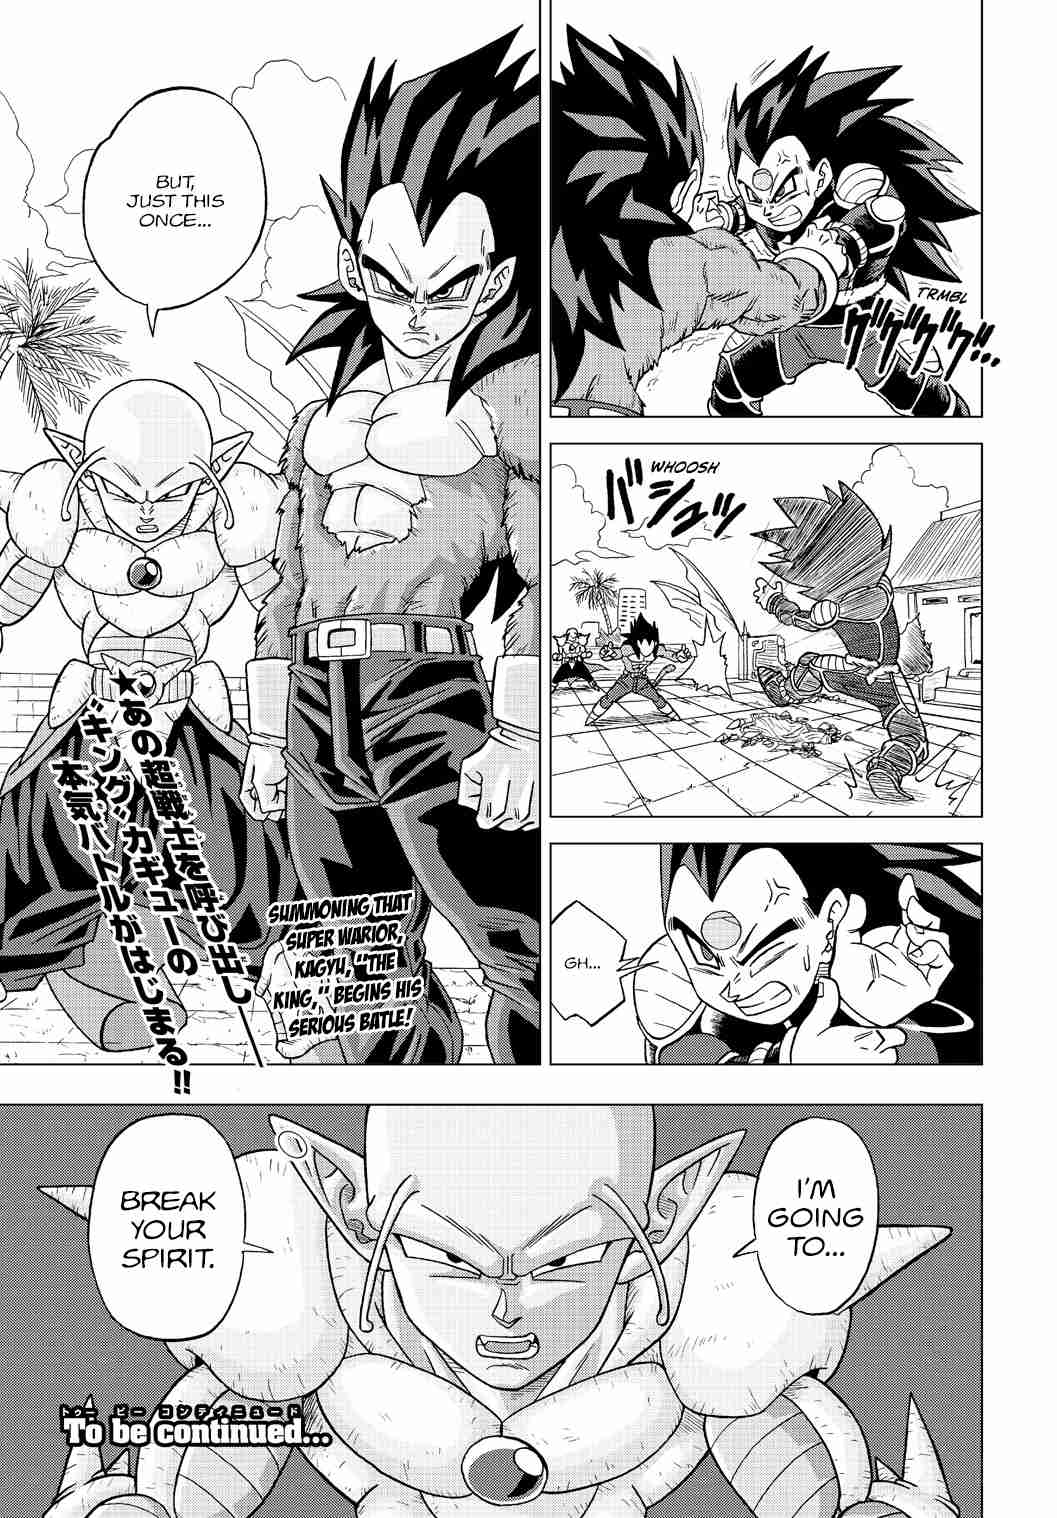 Dragon Ball Heroes Victory Mission Ch. 19 "King's" Choice!!